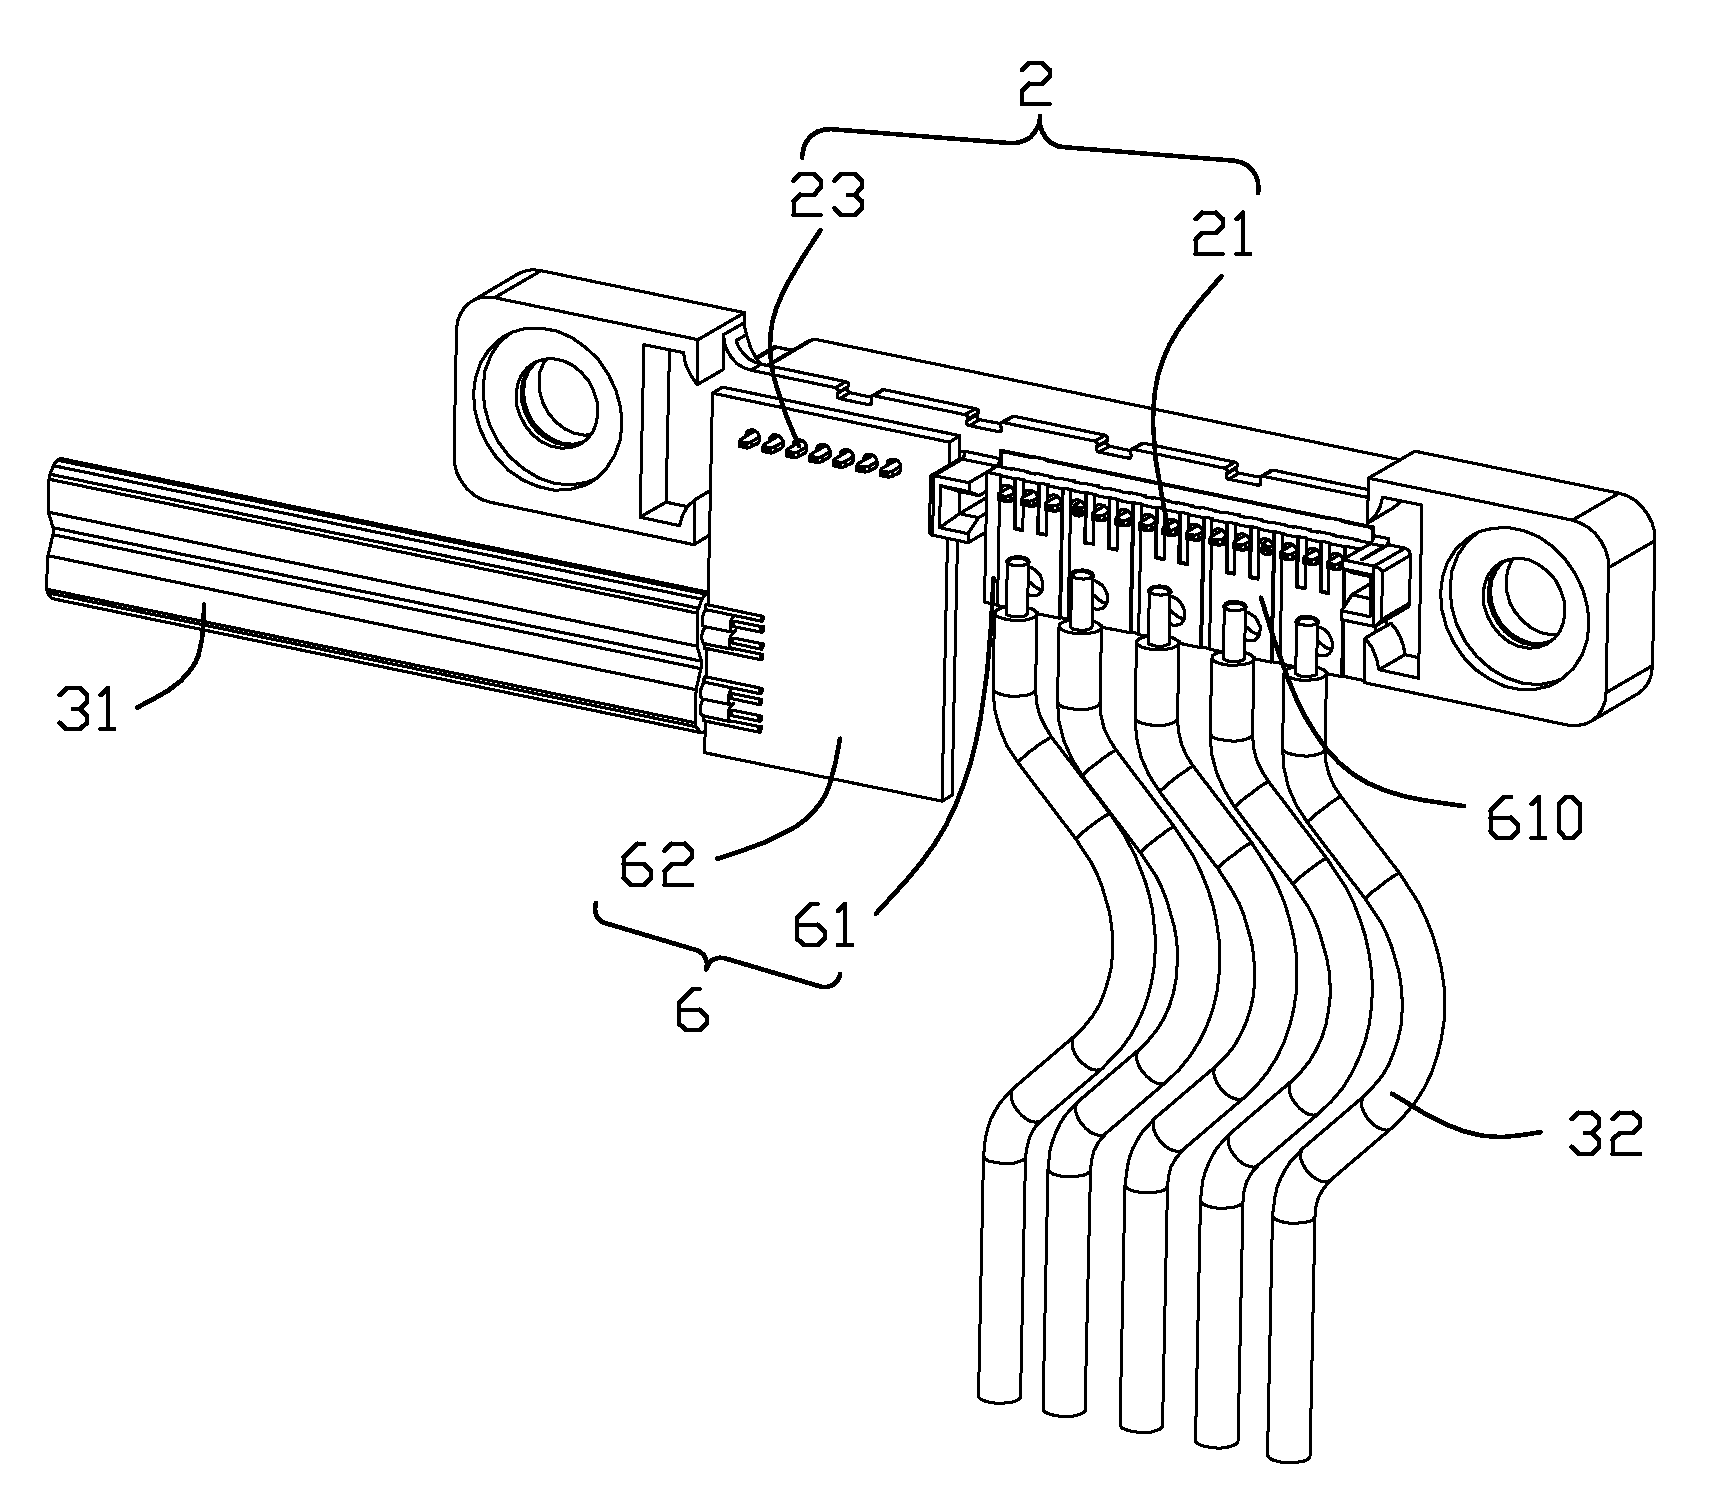 Plug connector with improved cable arrangement and convenient assembly